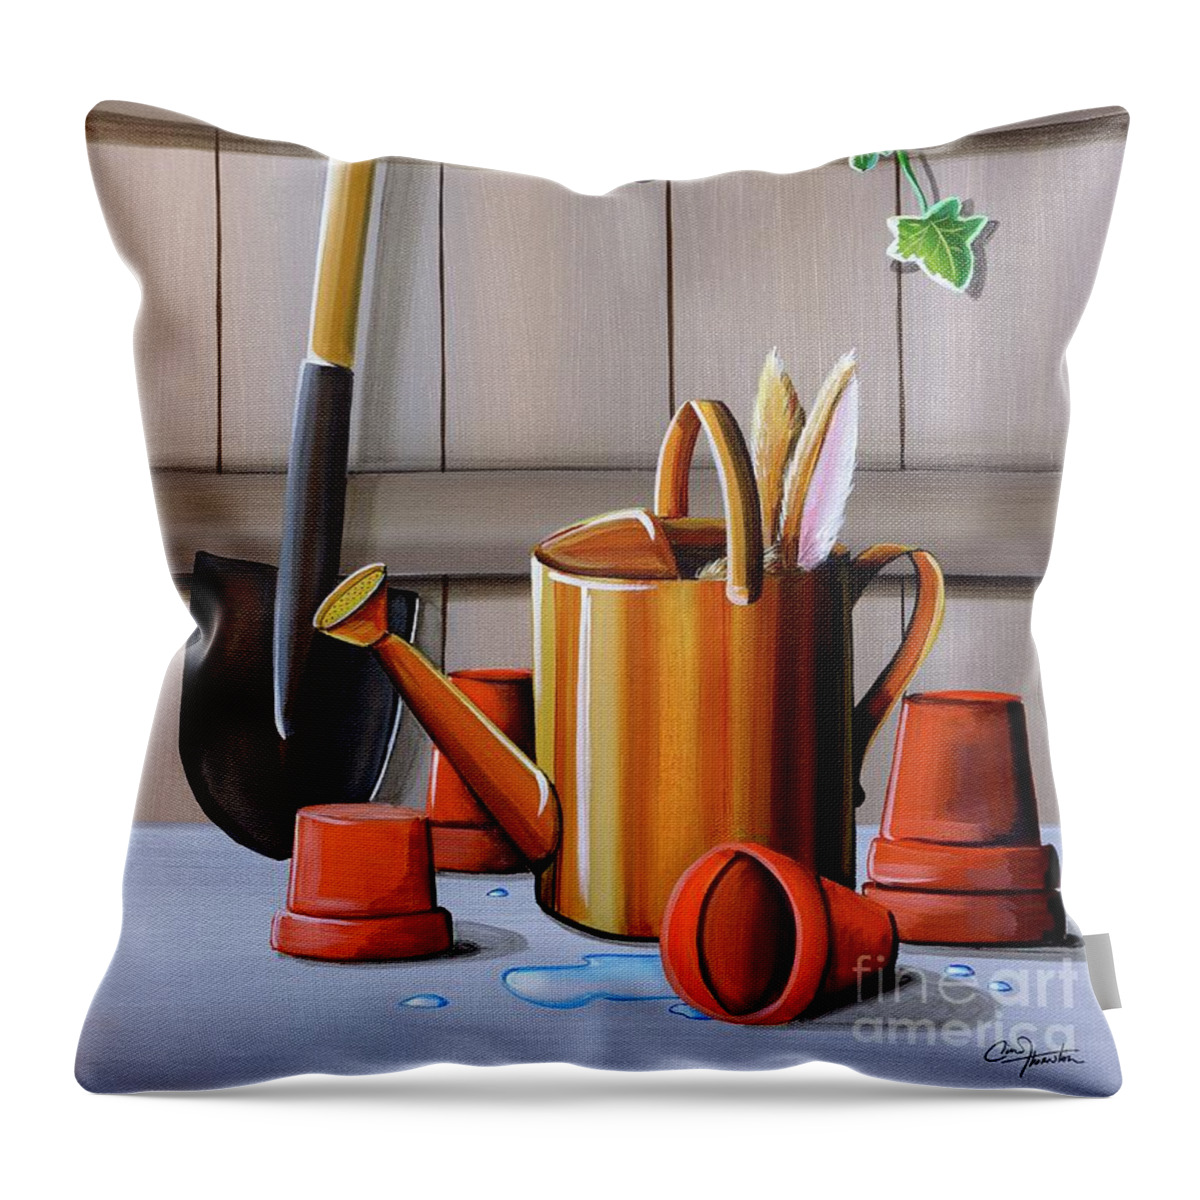 Peter Rabbit Throw Pillow featuring the painting Peter Rabbit Hides by Cindy Thornton